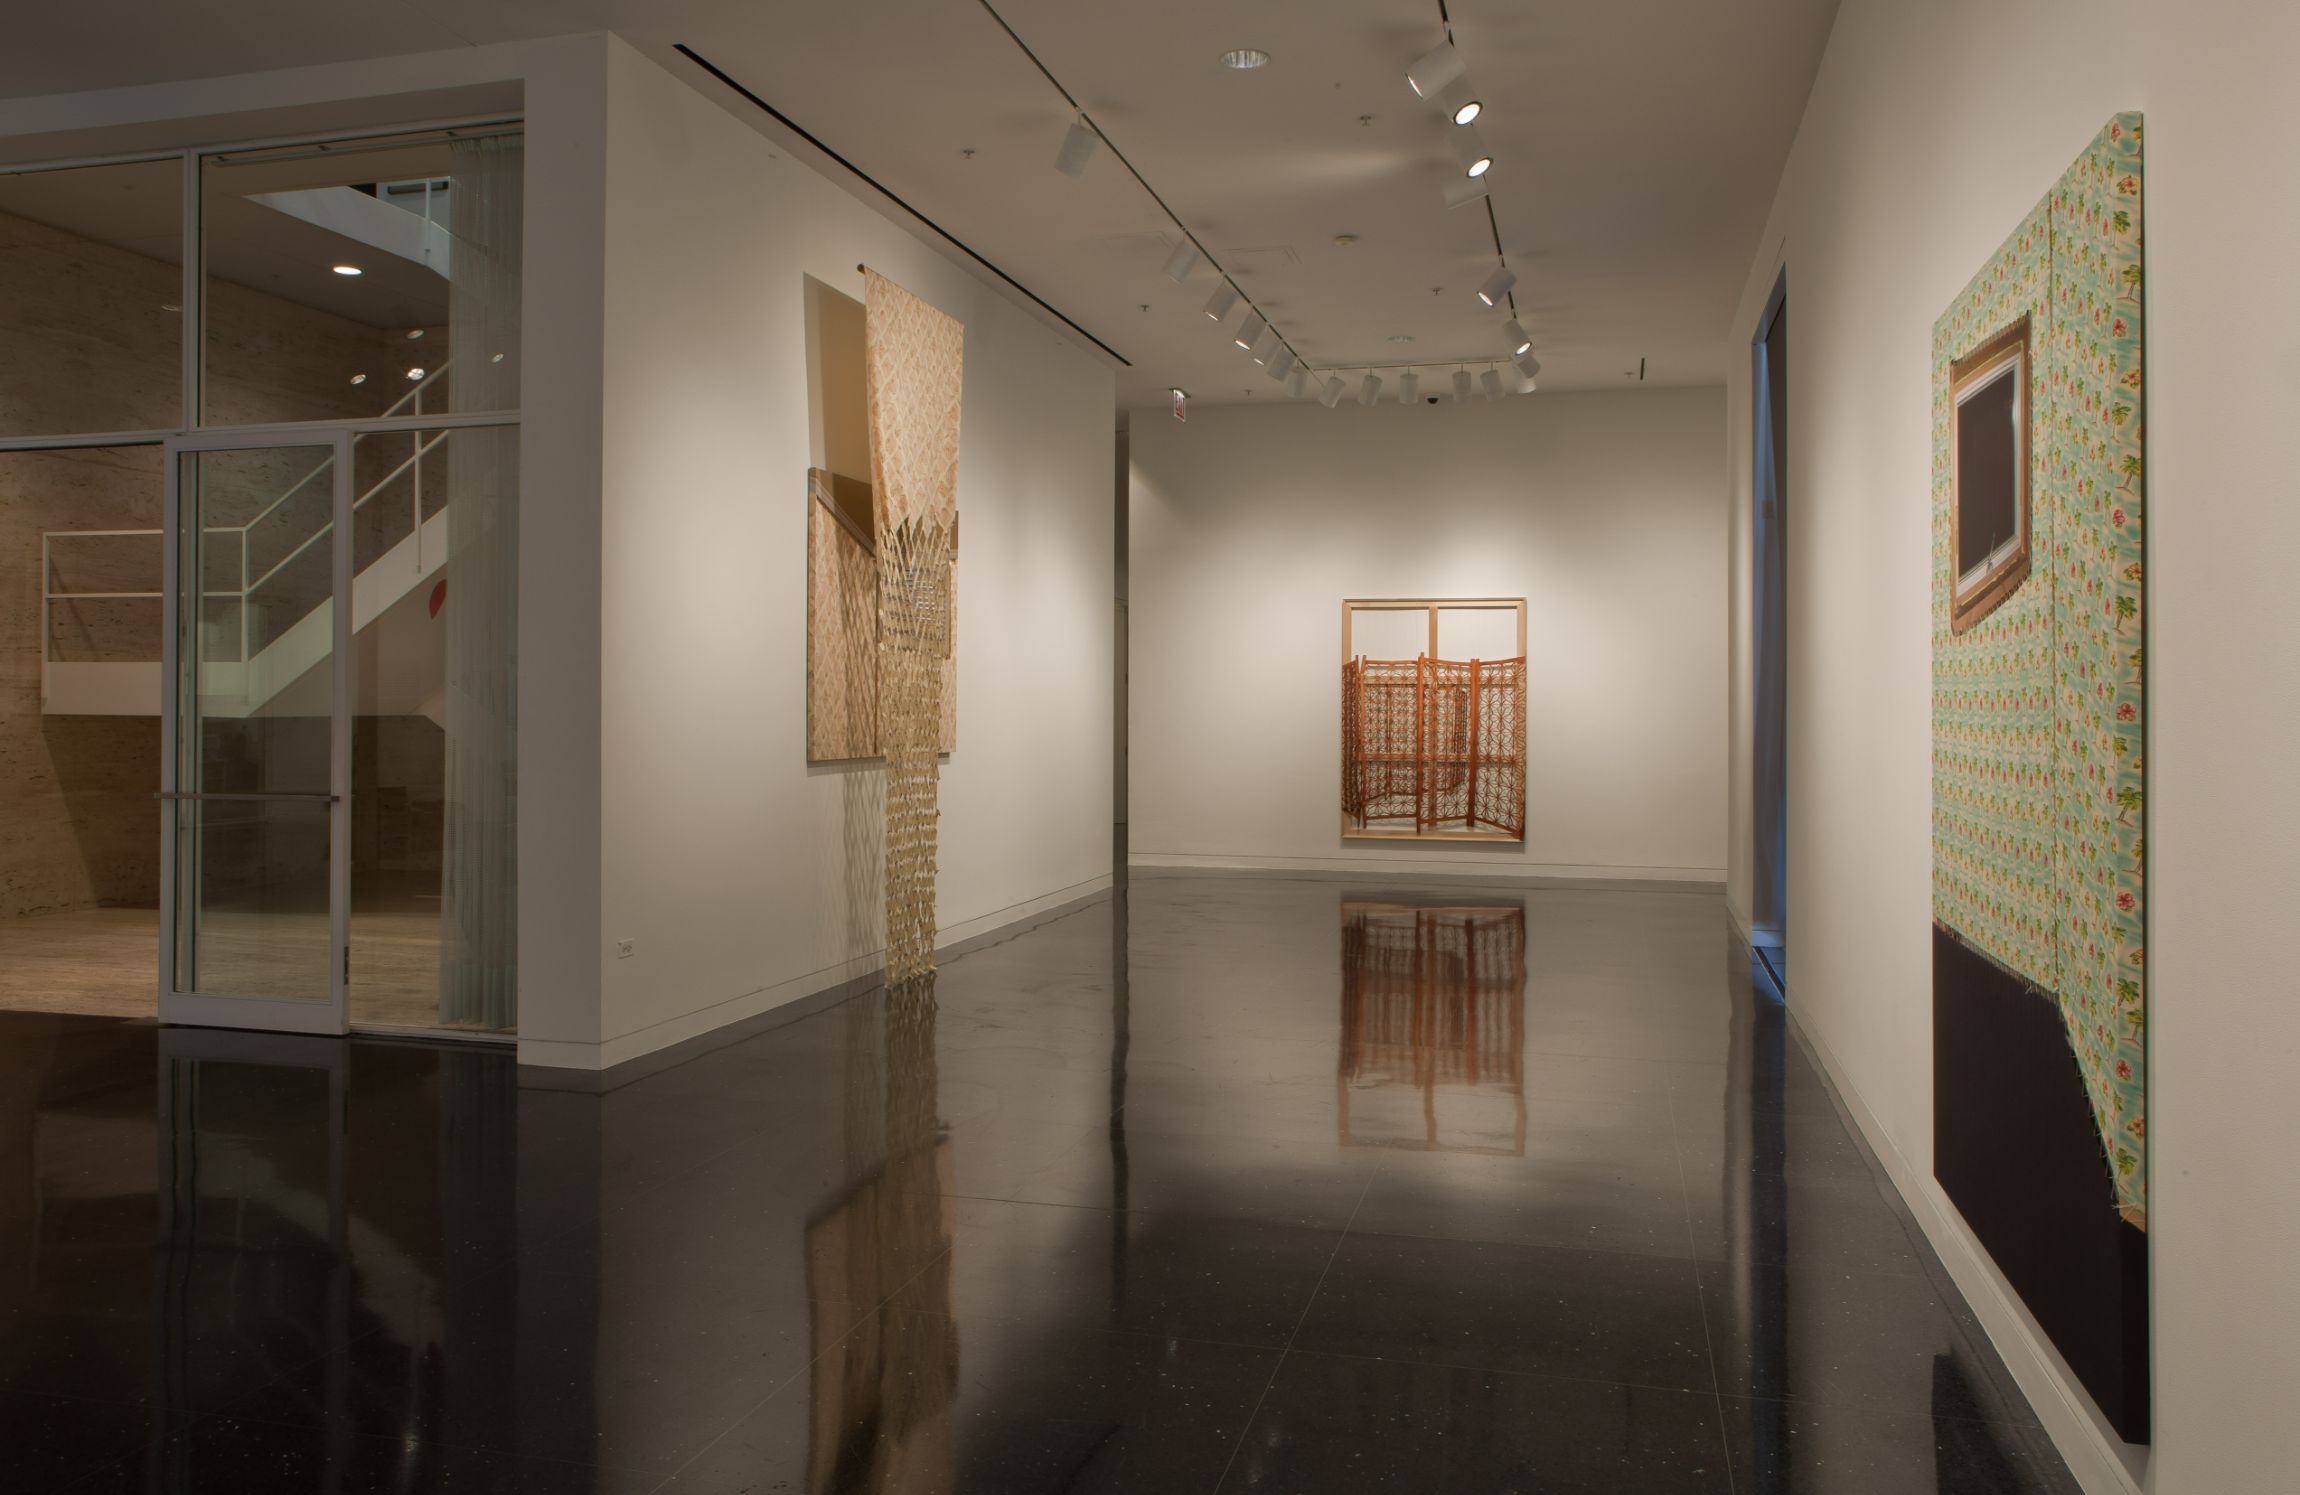 Three large-scale pieces hang on three walls. Their reflections can be seen on the floor.